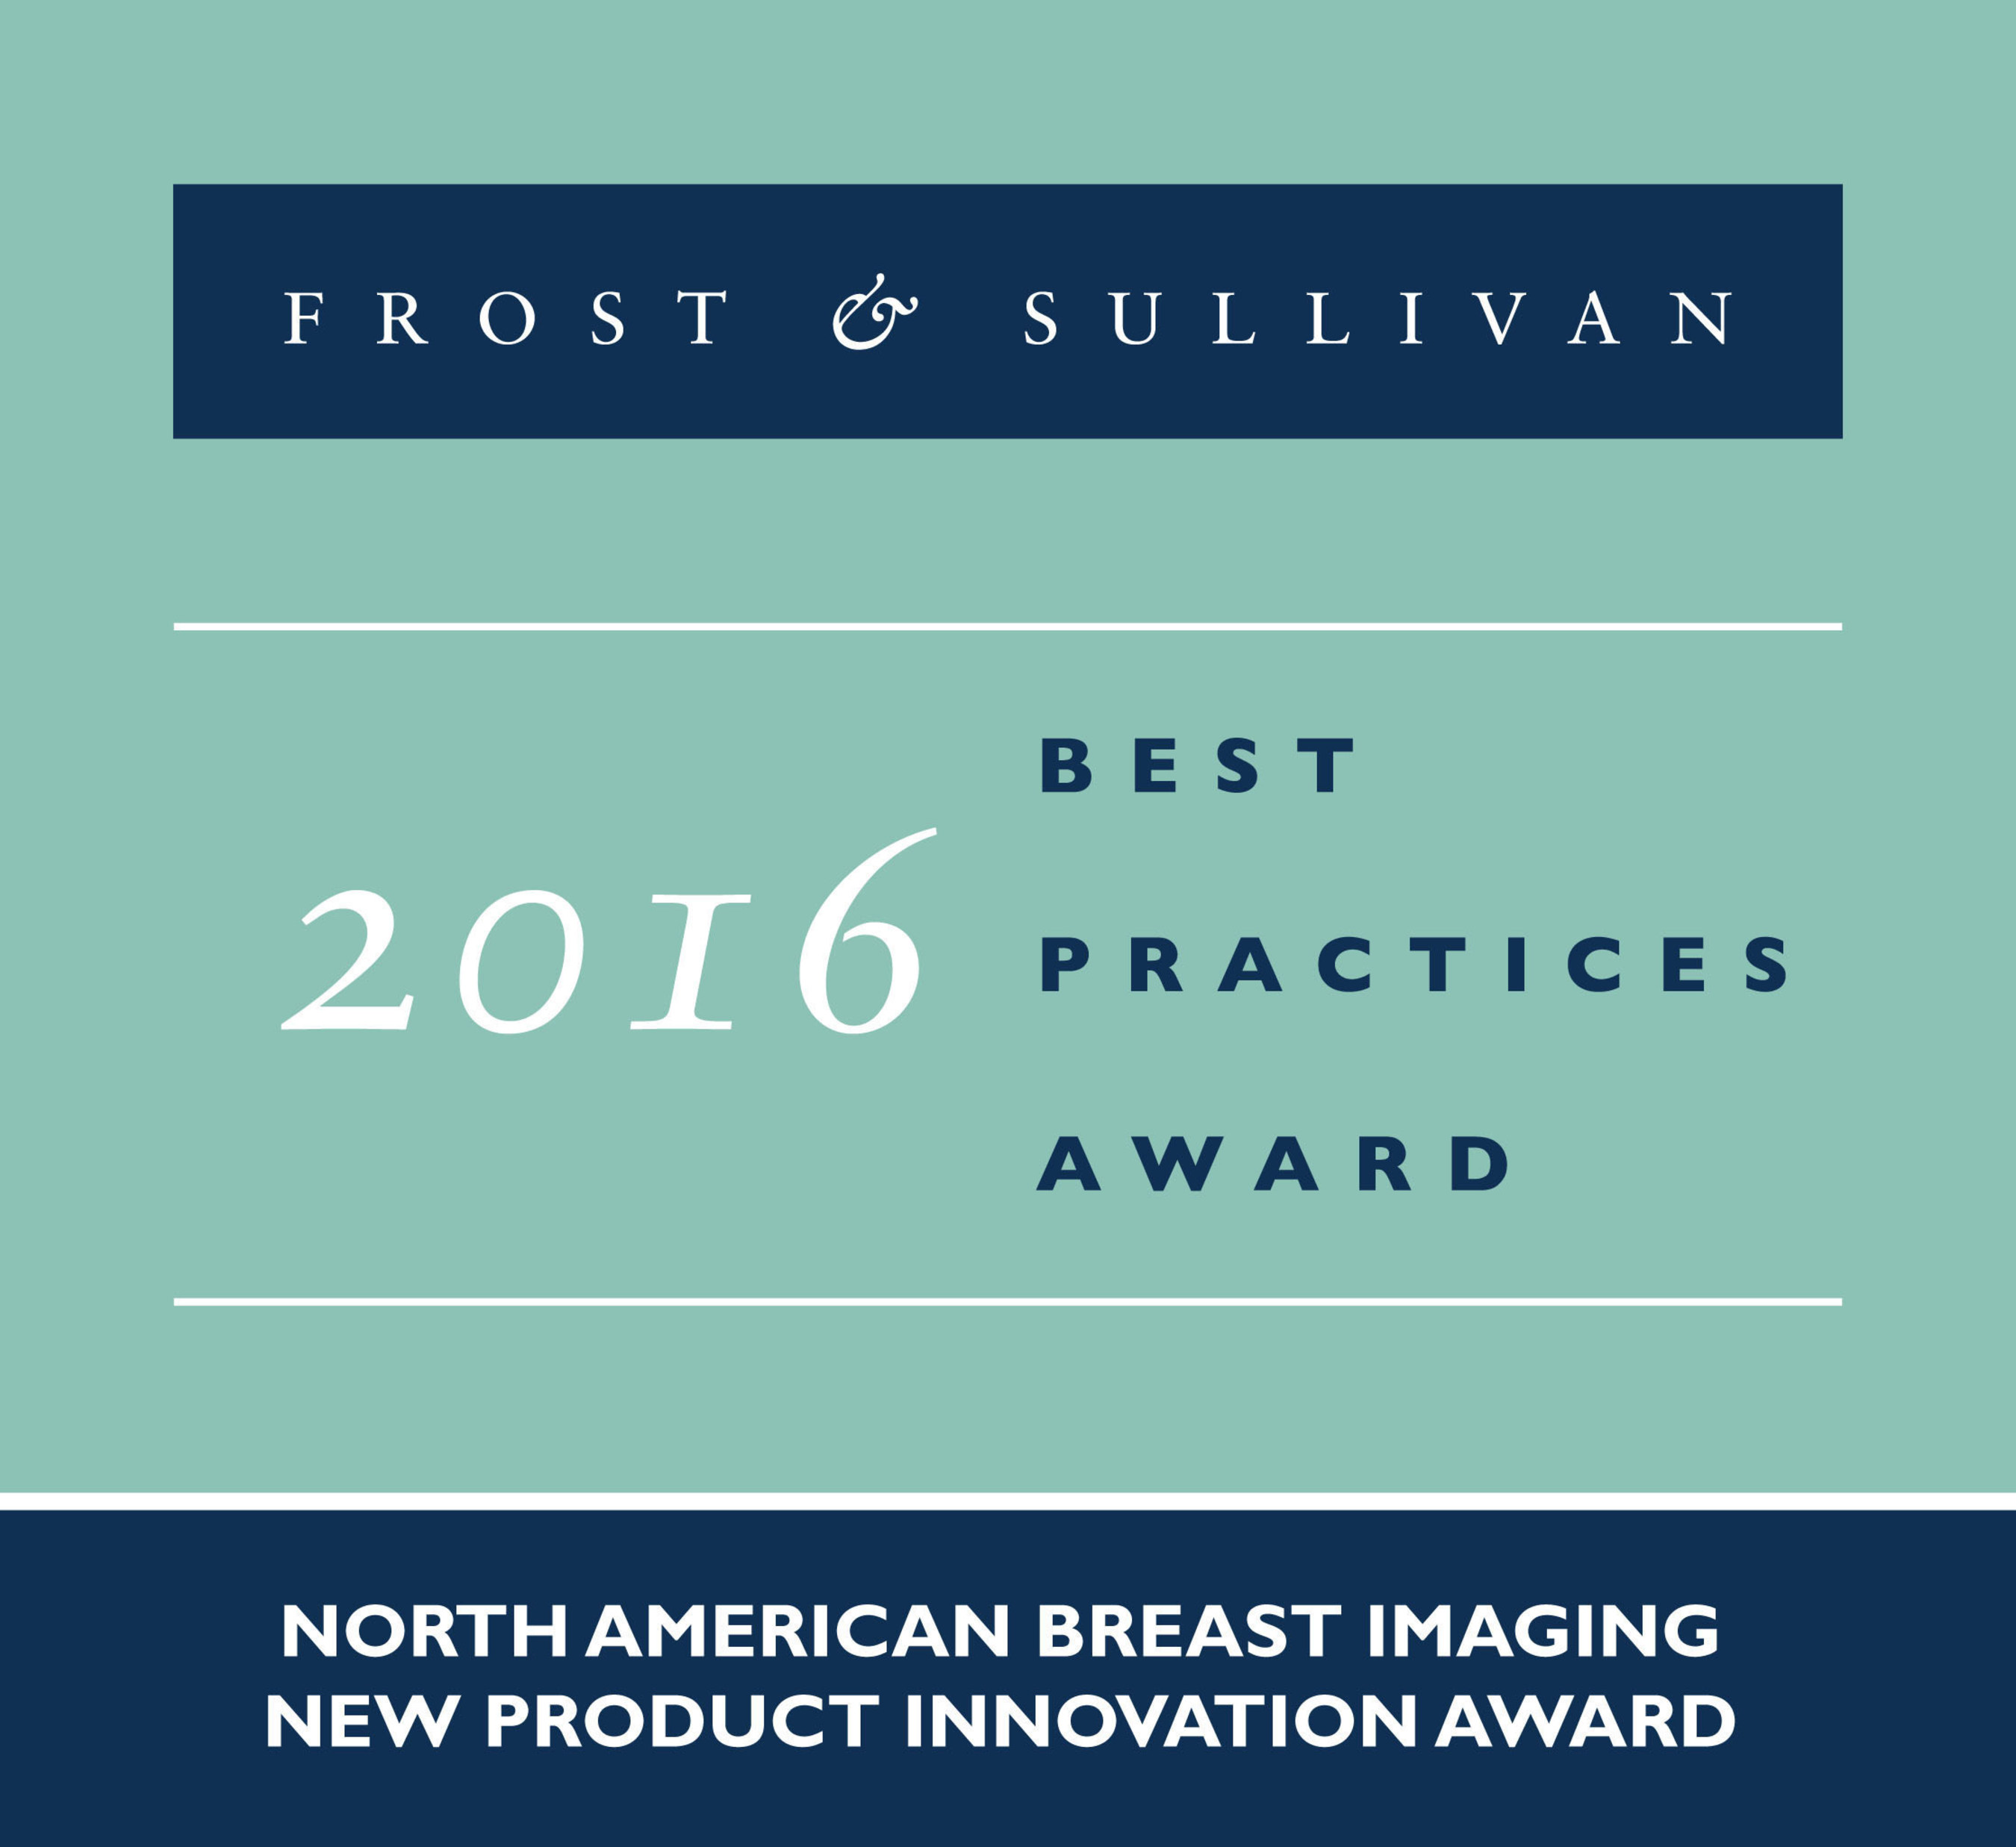 Koning Corporation Receives 2016 North American Breast Imaging New Product Innovation Award